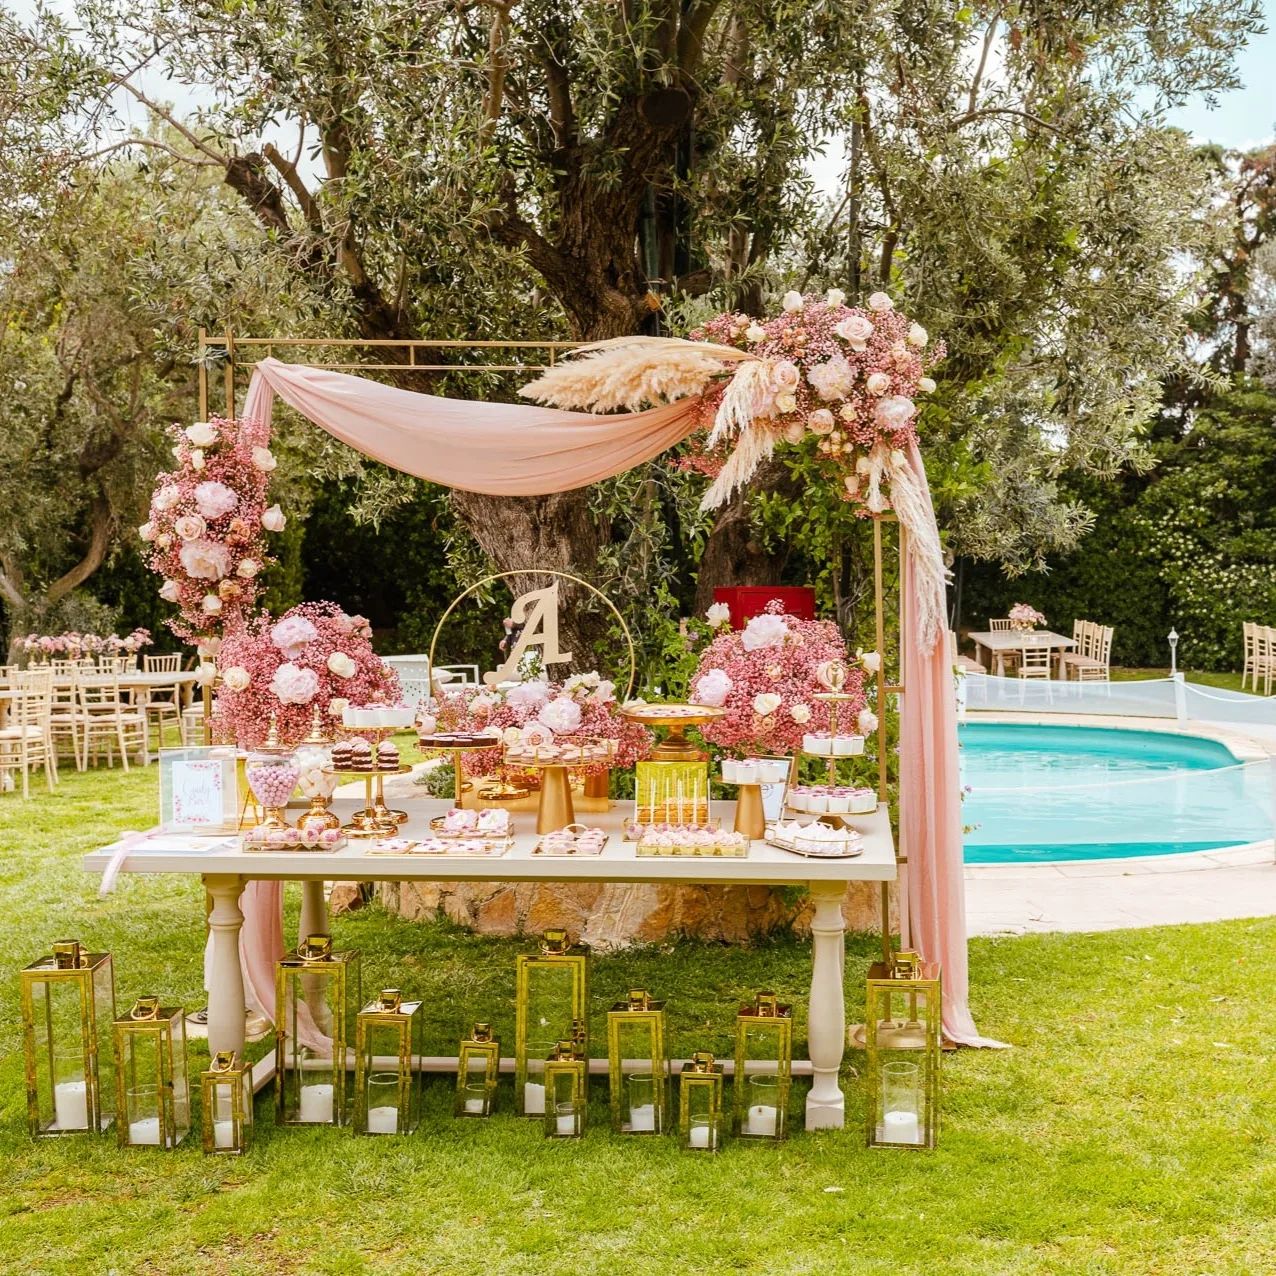 Photo by Akis Petretzikis on May 07 2023. May be an image of wedding cake tablecloth outdoors and